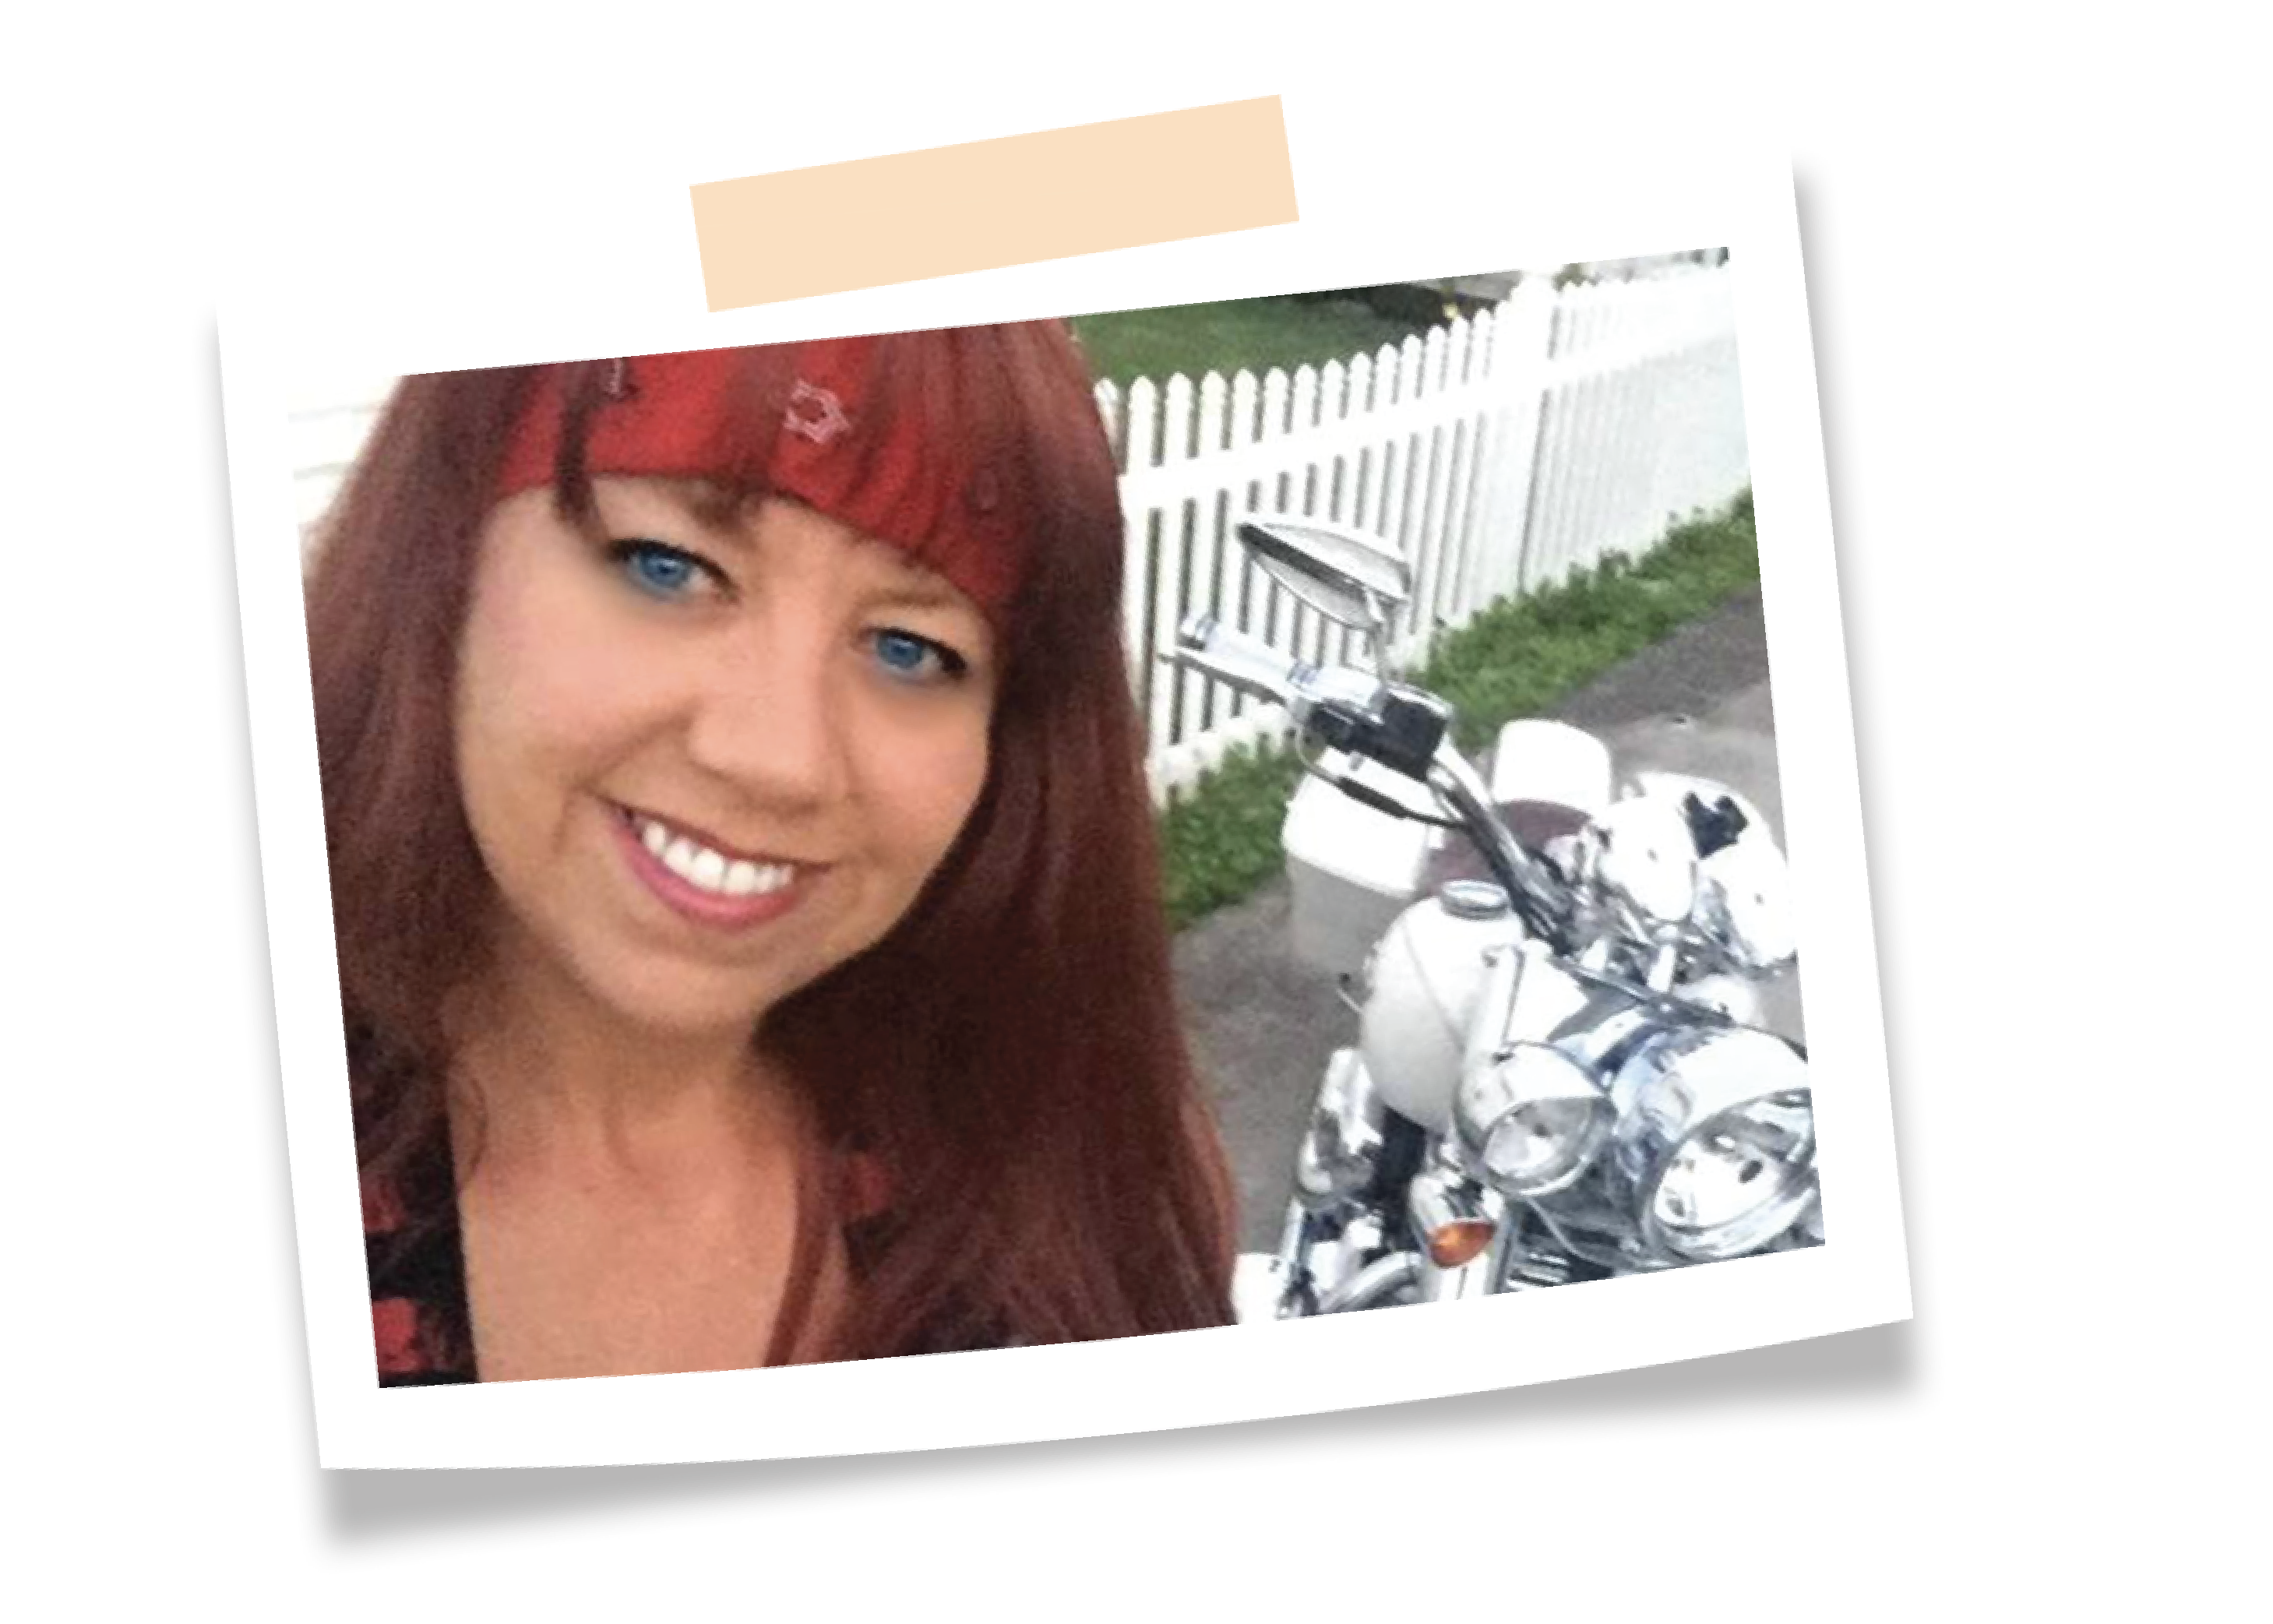 Kelly Starr standing next to her motorcycle